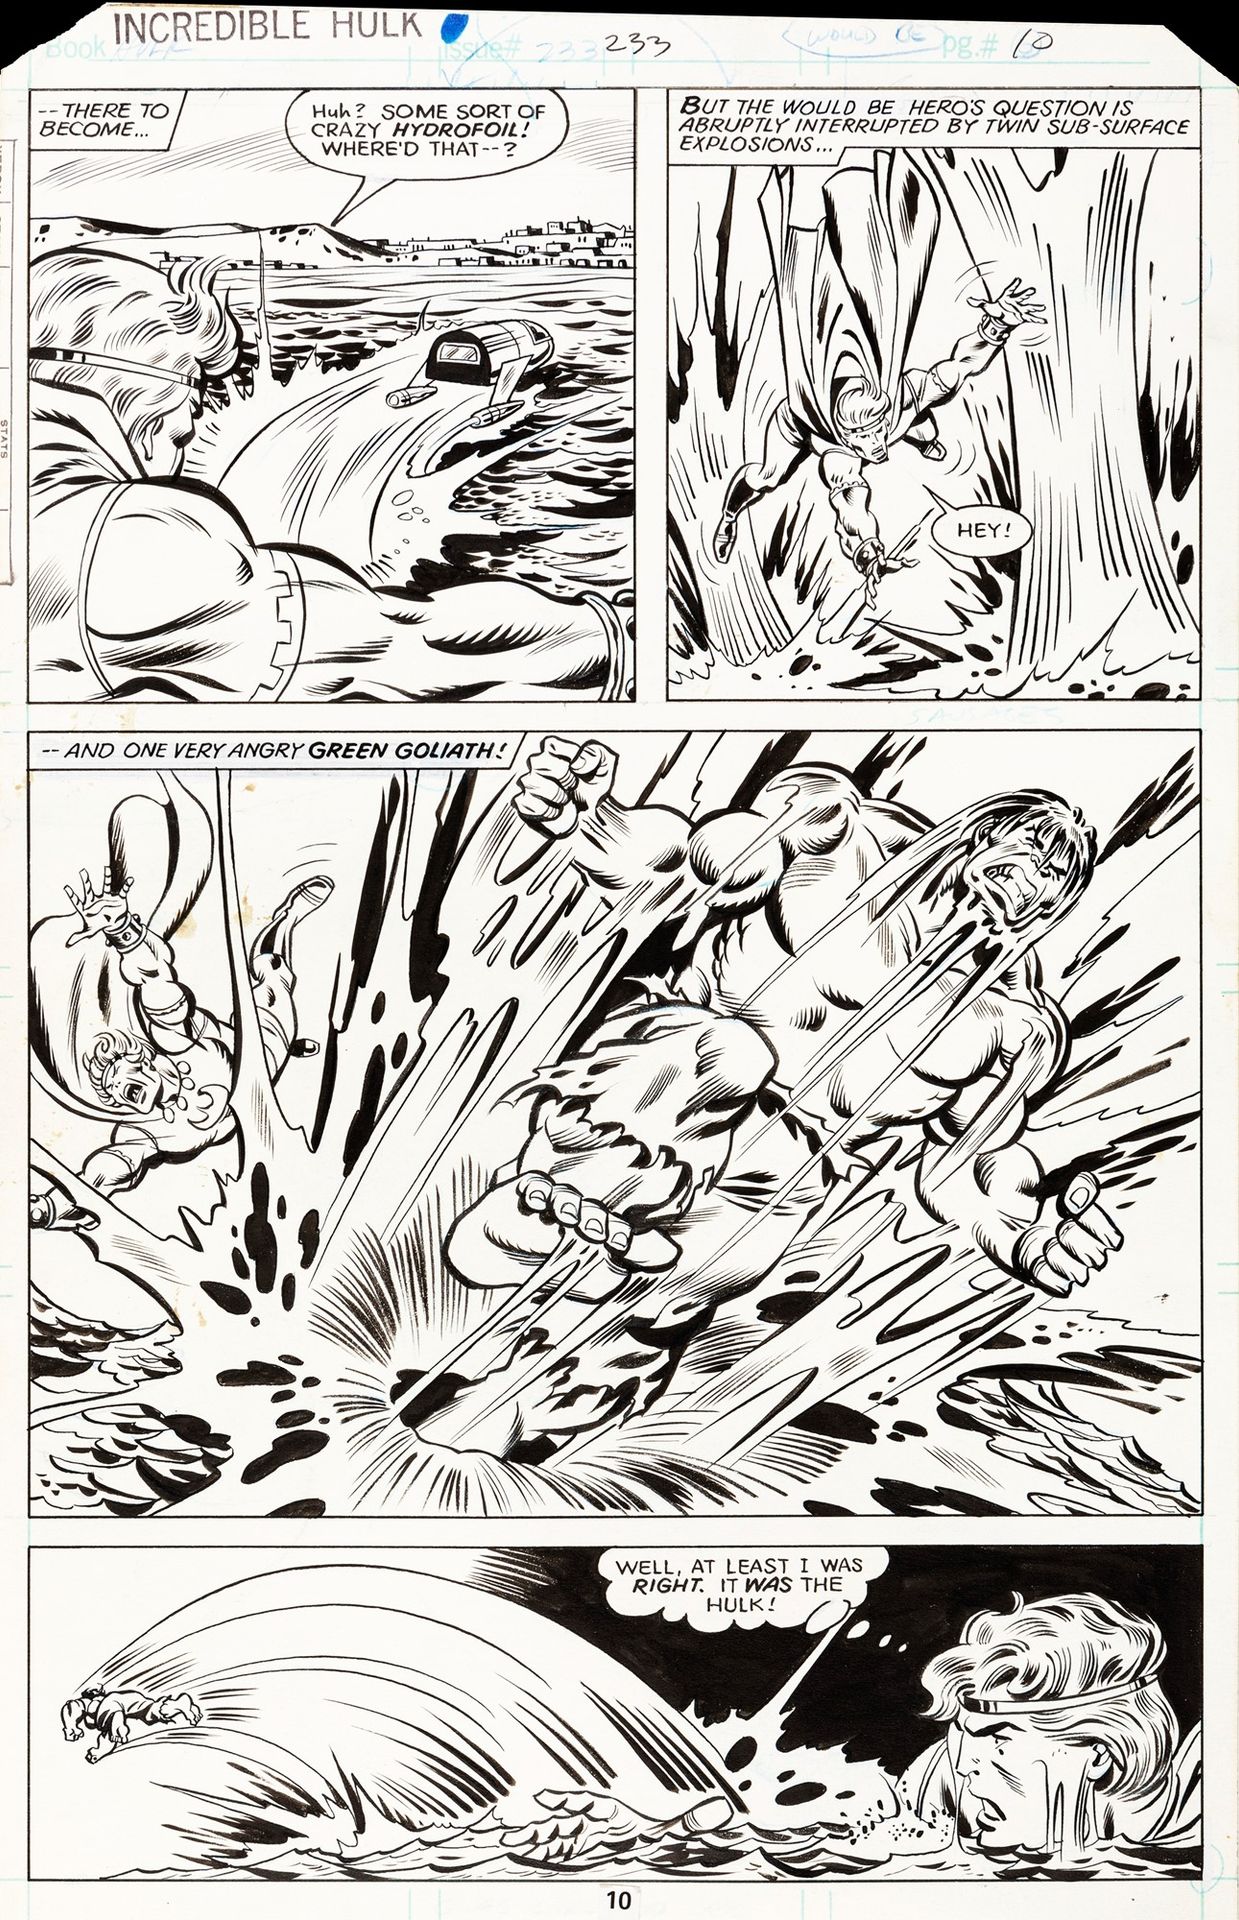 Sal BUSCEMA Incredible Hulk - ...At the Bottom of the Bay!, 1979

pencil and ink&hellip;